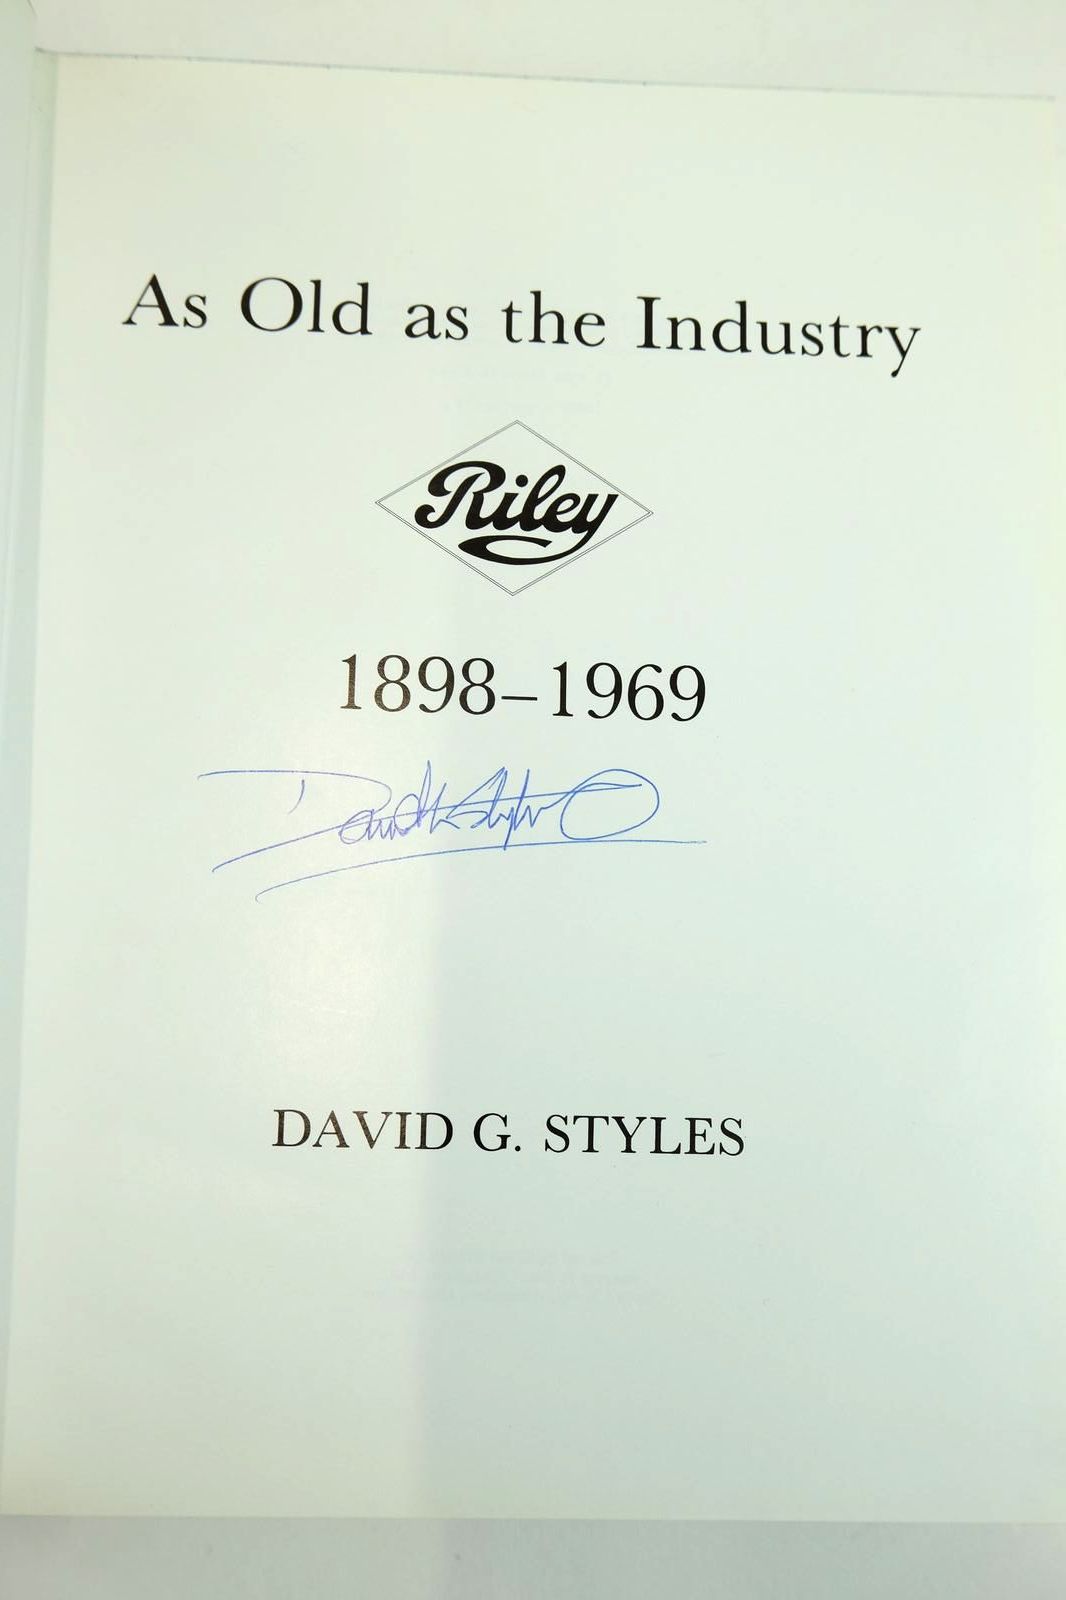 Photo of AS OLD AS THE INDUSTRY RILEY 1898 - 1969 written by Styles, David G. published by David G. Styles (STOCK CODE: 2132622)  for sale by Stella & Rose's Books